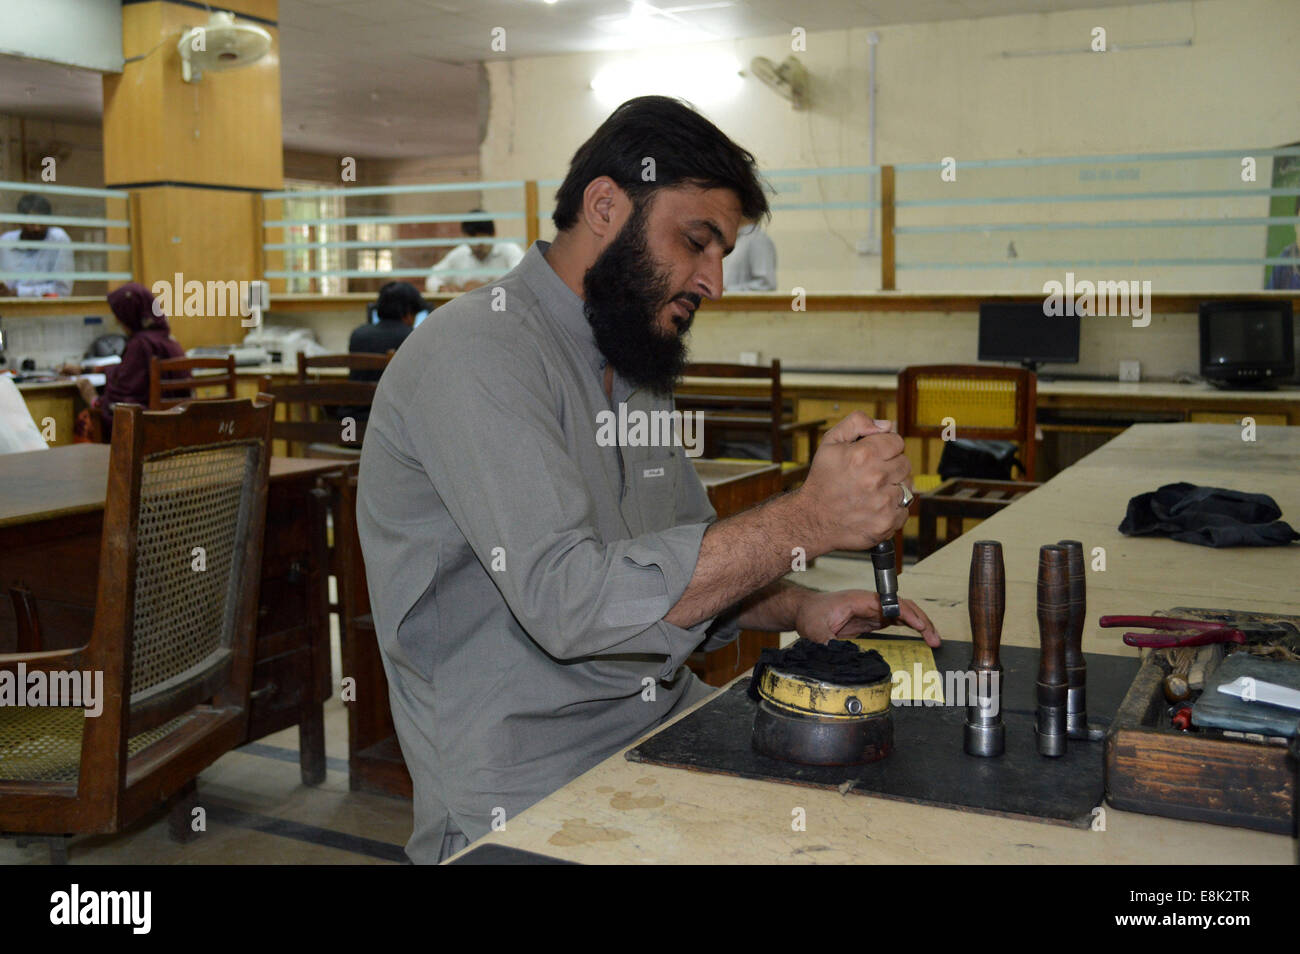 Quetta. 9th Oct, 2014. A Pakistani post office employee stamps a mail on the World Post Day in southwest Pakistan's Quetta on Oct. 9, 2014. World Post Day is celebrated each year on Oct. 9, the anniversary of the establishment of the Universal Postal Union (UPU) in 1874 in the Swiss capital, Berne. It was declared World Post Day by the UPU Congress held in Tokyo, Japan, in 1969. Credit:  Irfan/Xinhua/Alamy Live News Stock Photo